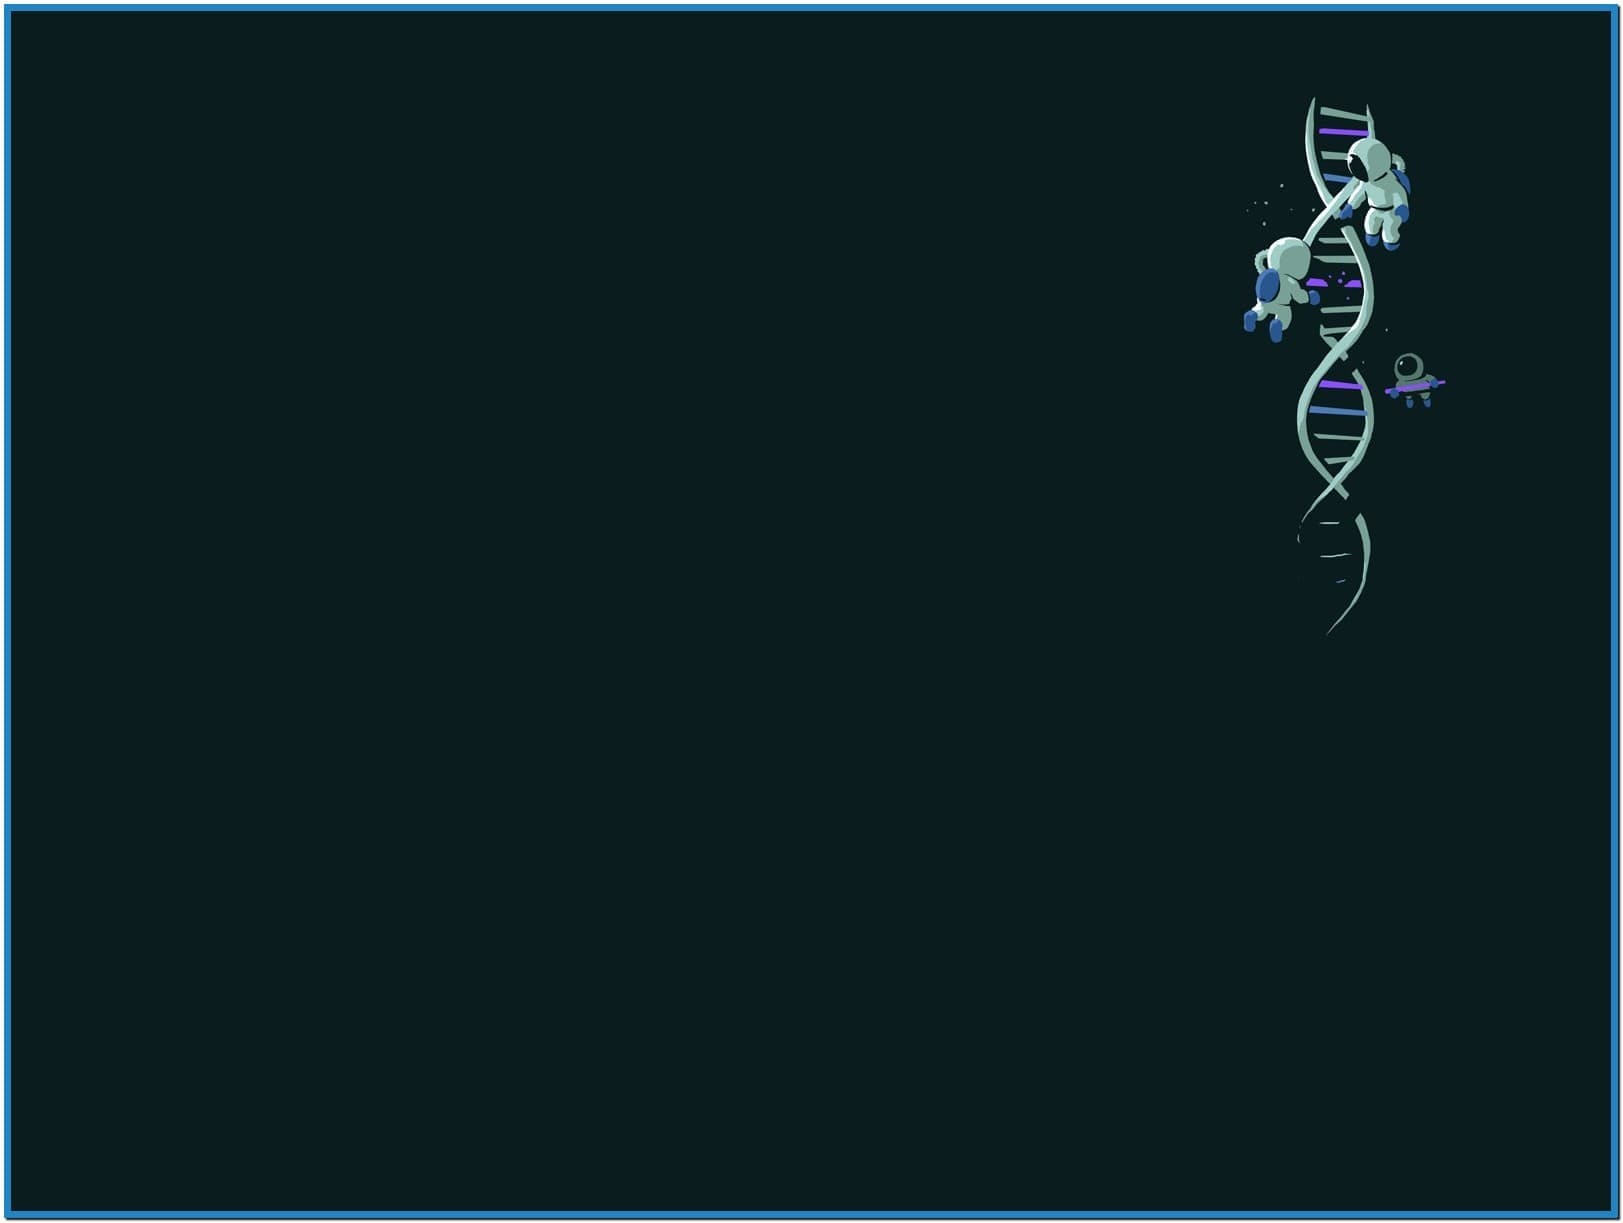 Dna double helix screensaver   Download free